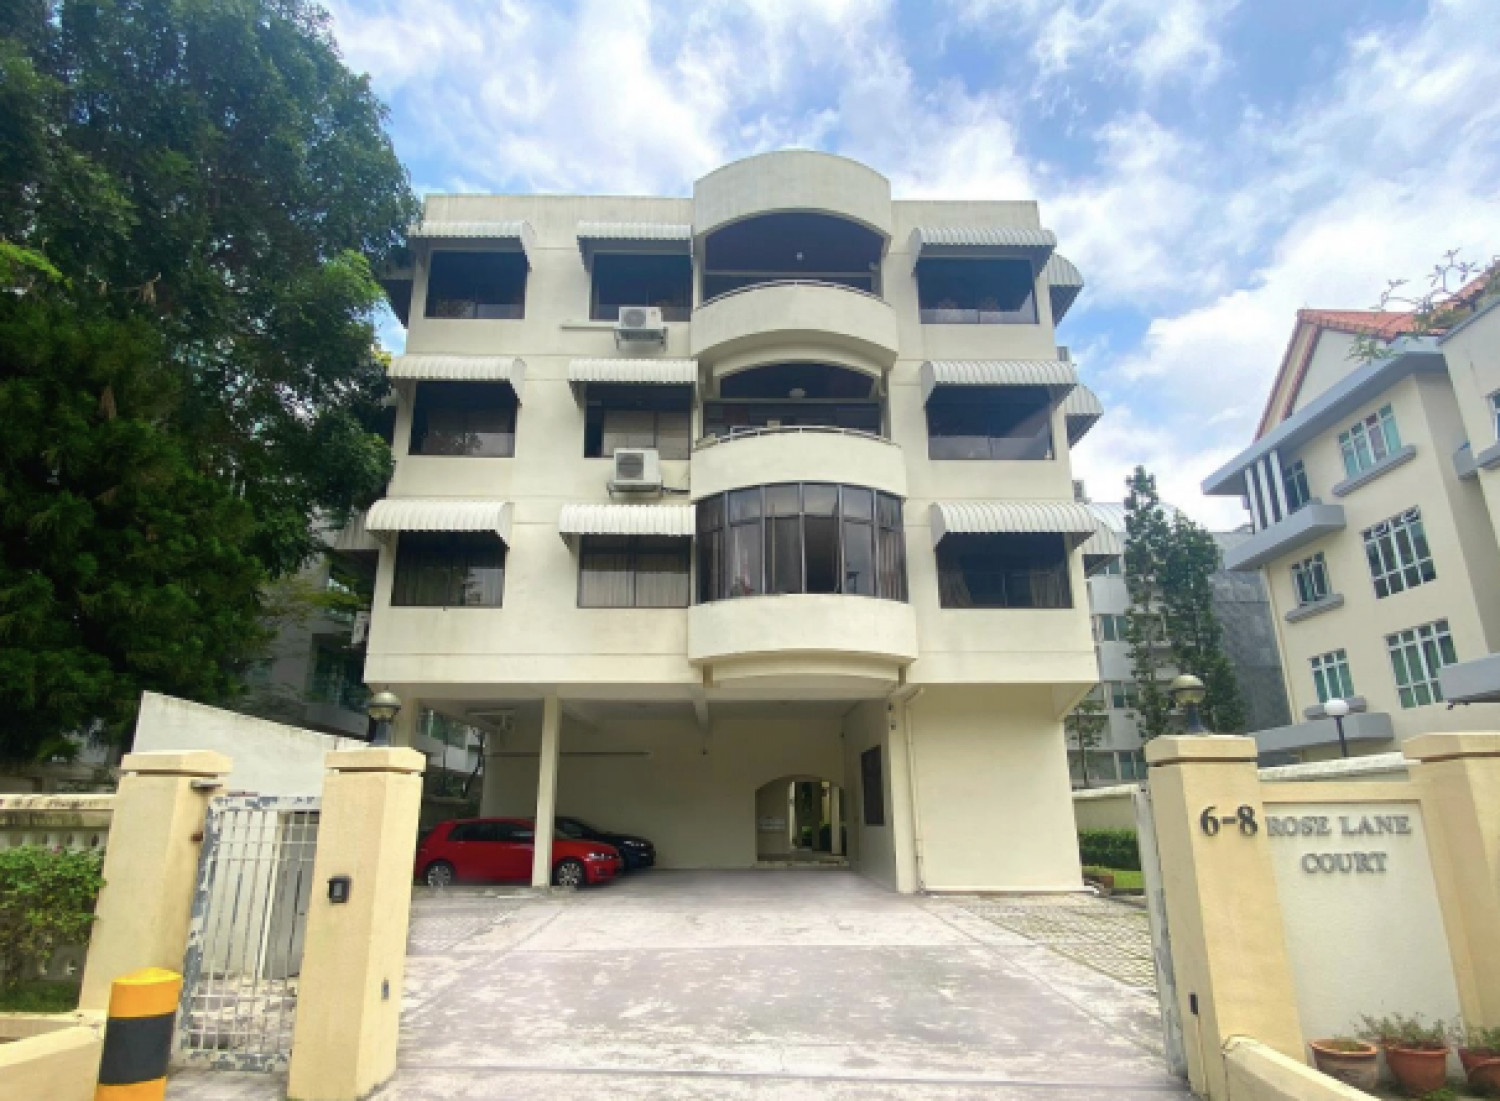 Roselane Court in Tanjong Katong launched for sale by tender at $23 mil - Property News